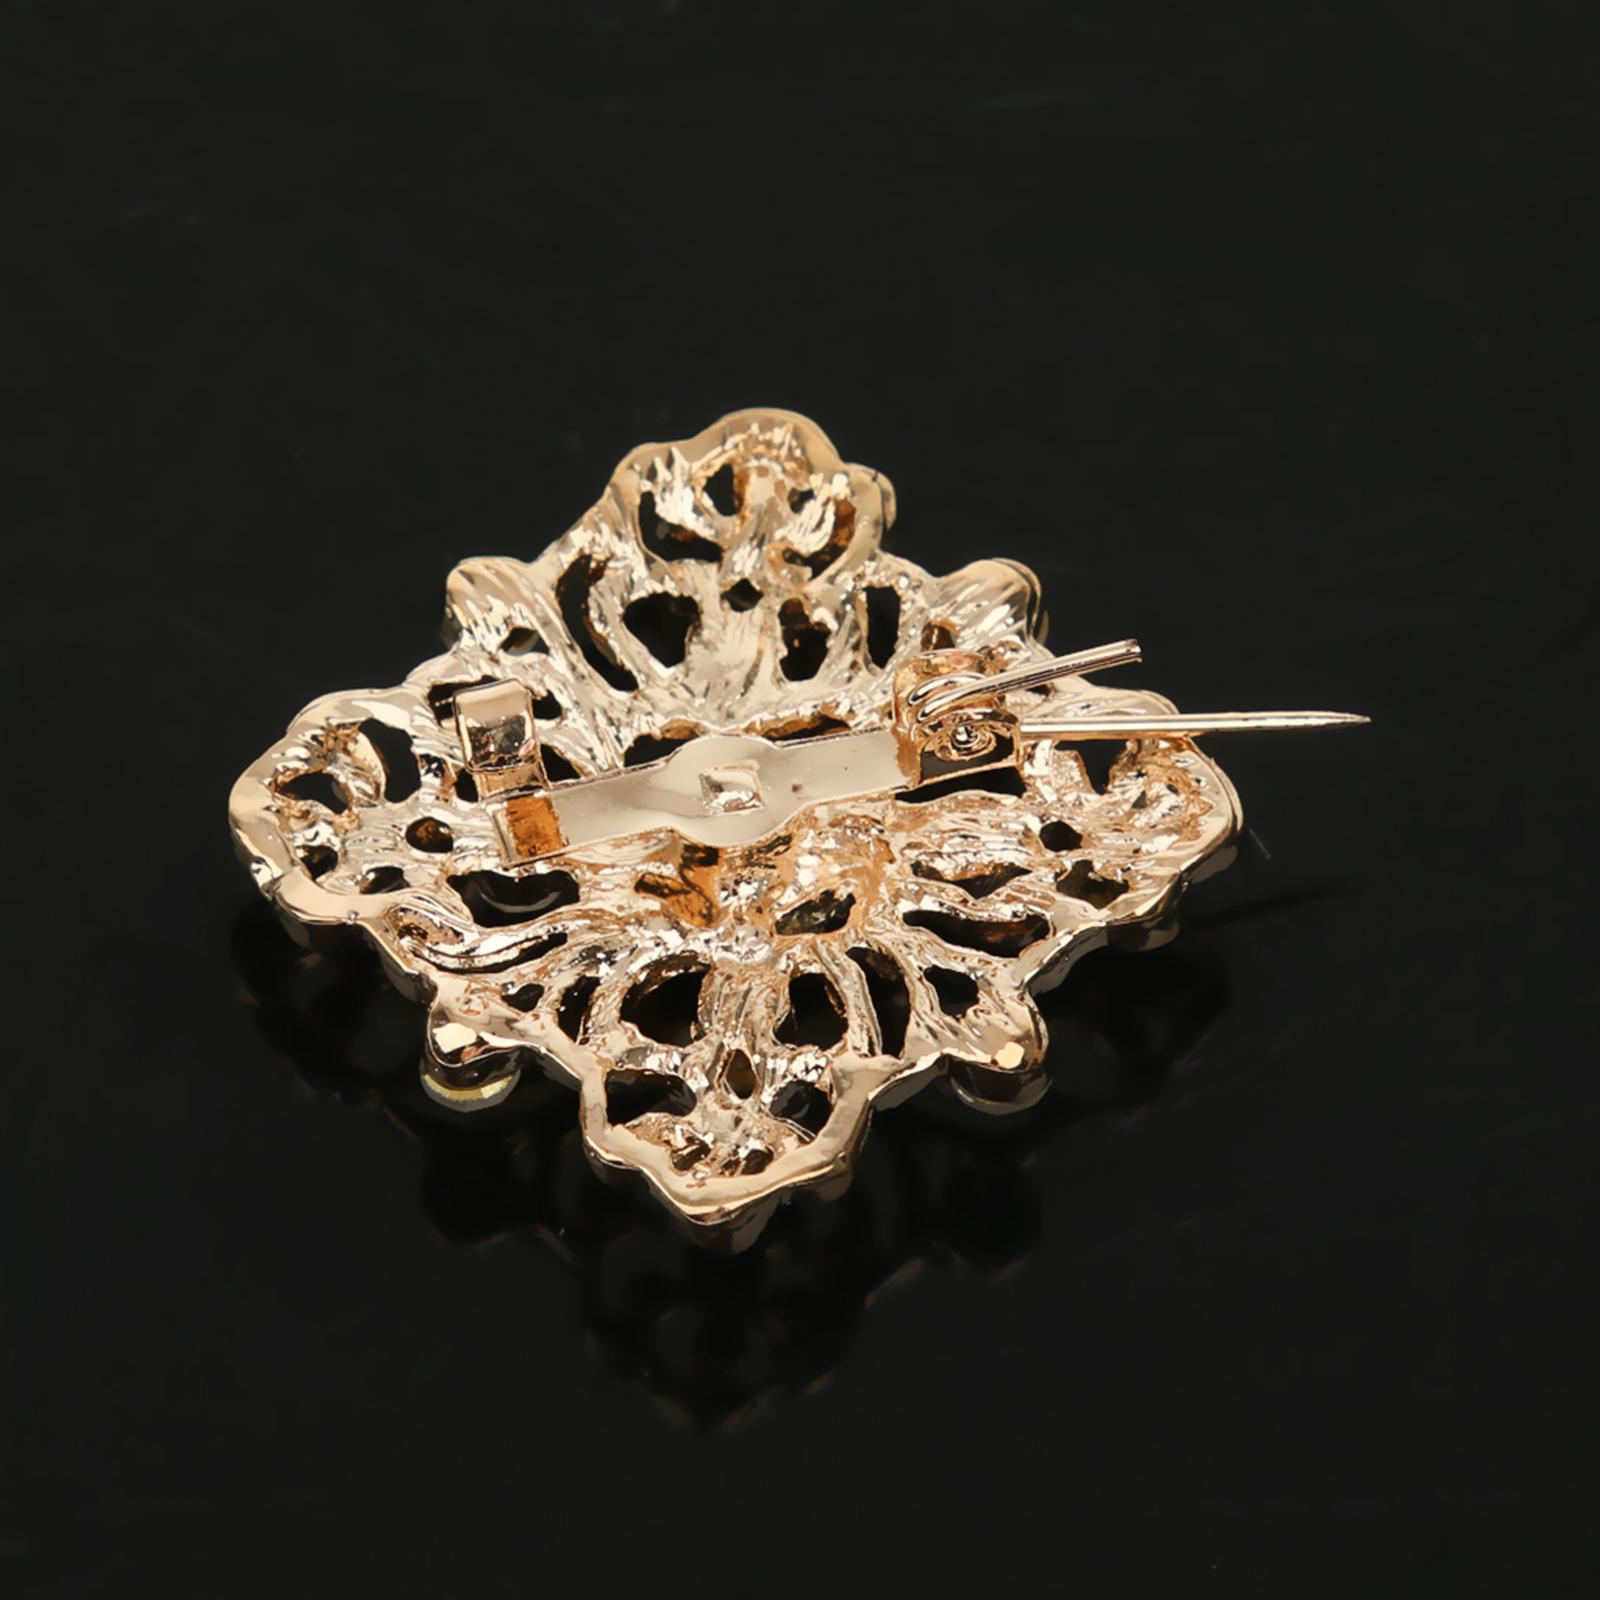 12pcs Flower Shape Gold Plated Rhinestone Golden Brooches Small